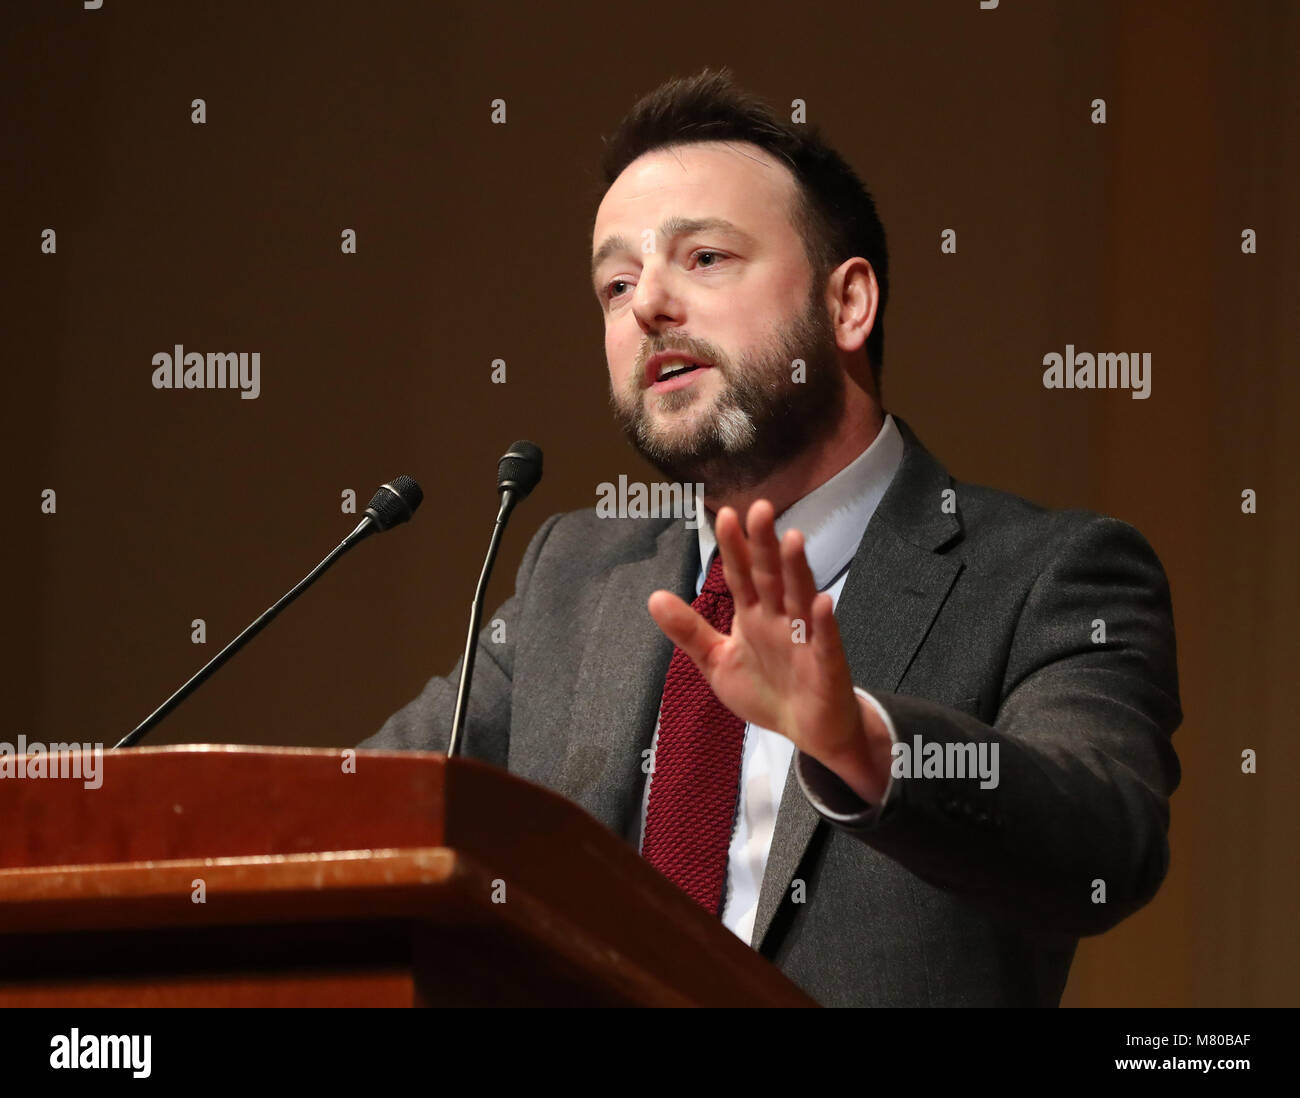 SDLP Leader Colum Eastwood speaking at a Good Friday Agreement 20th anniversary event at the Library of Congress in Washington DC on day three of Taoiseach Leo Varadkar's week long visit to the United States of America. Stock Photo